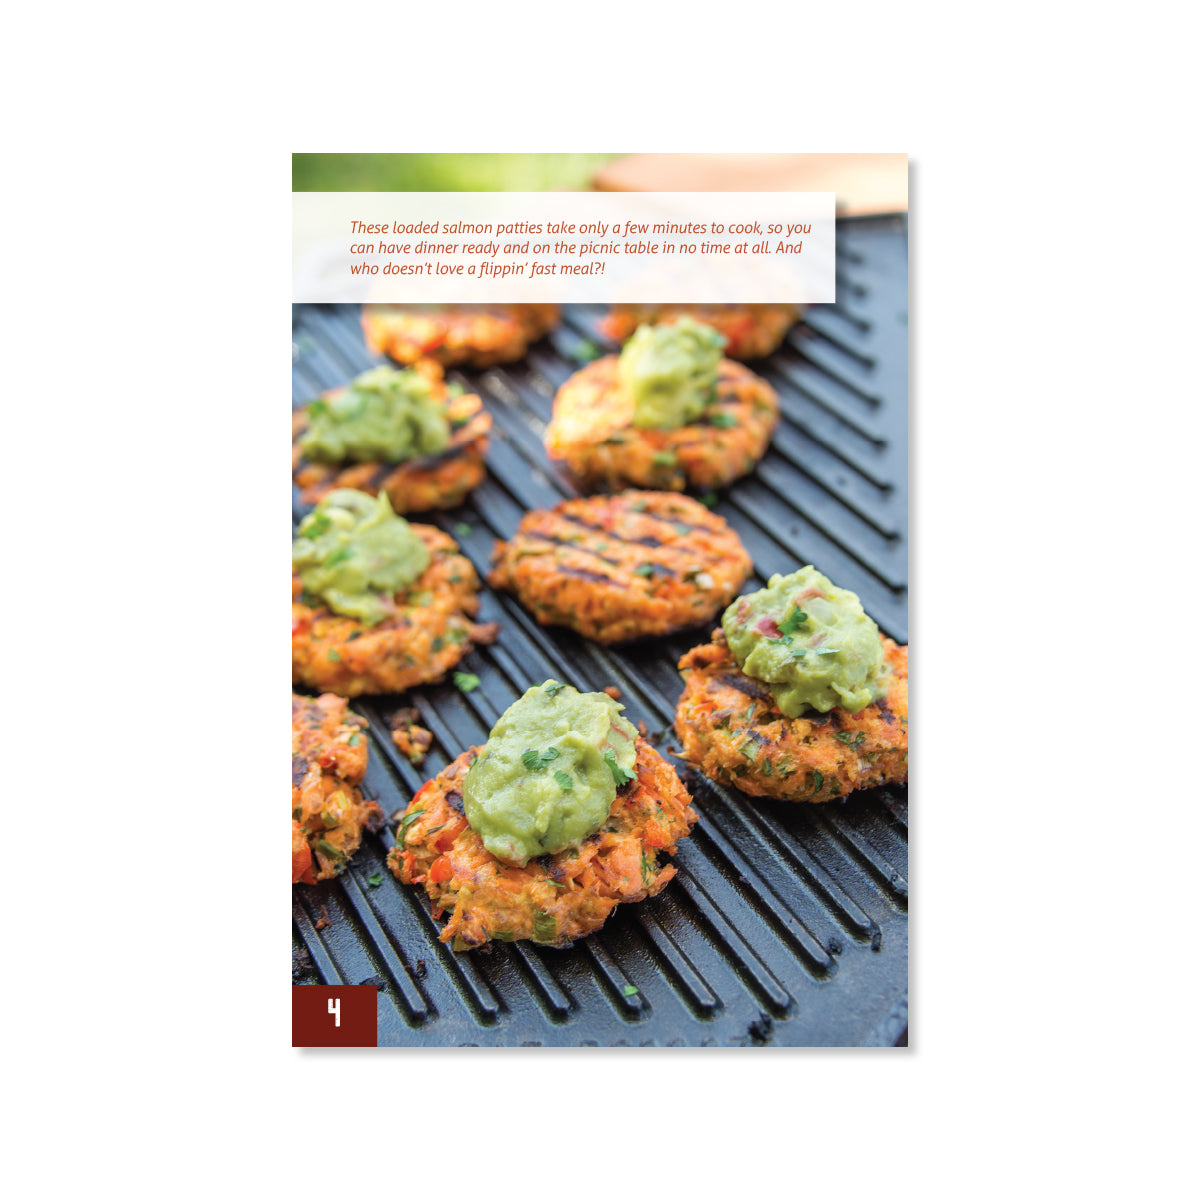 Flippin' Good Grill Recipe Book cover, great for get-togethers.